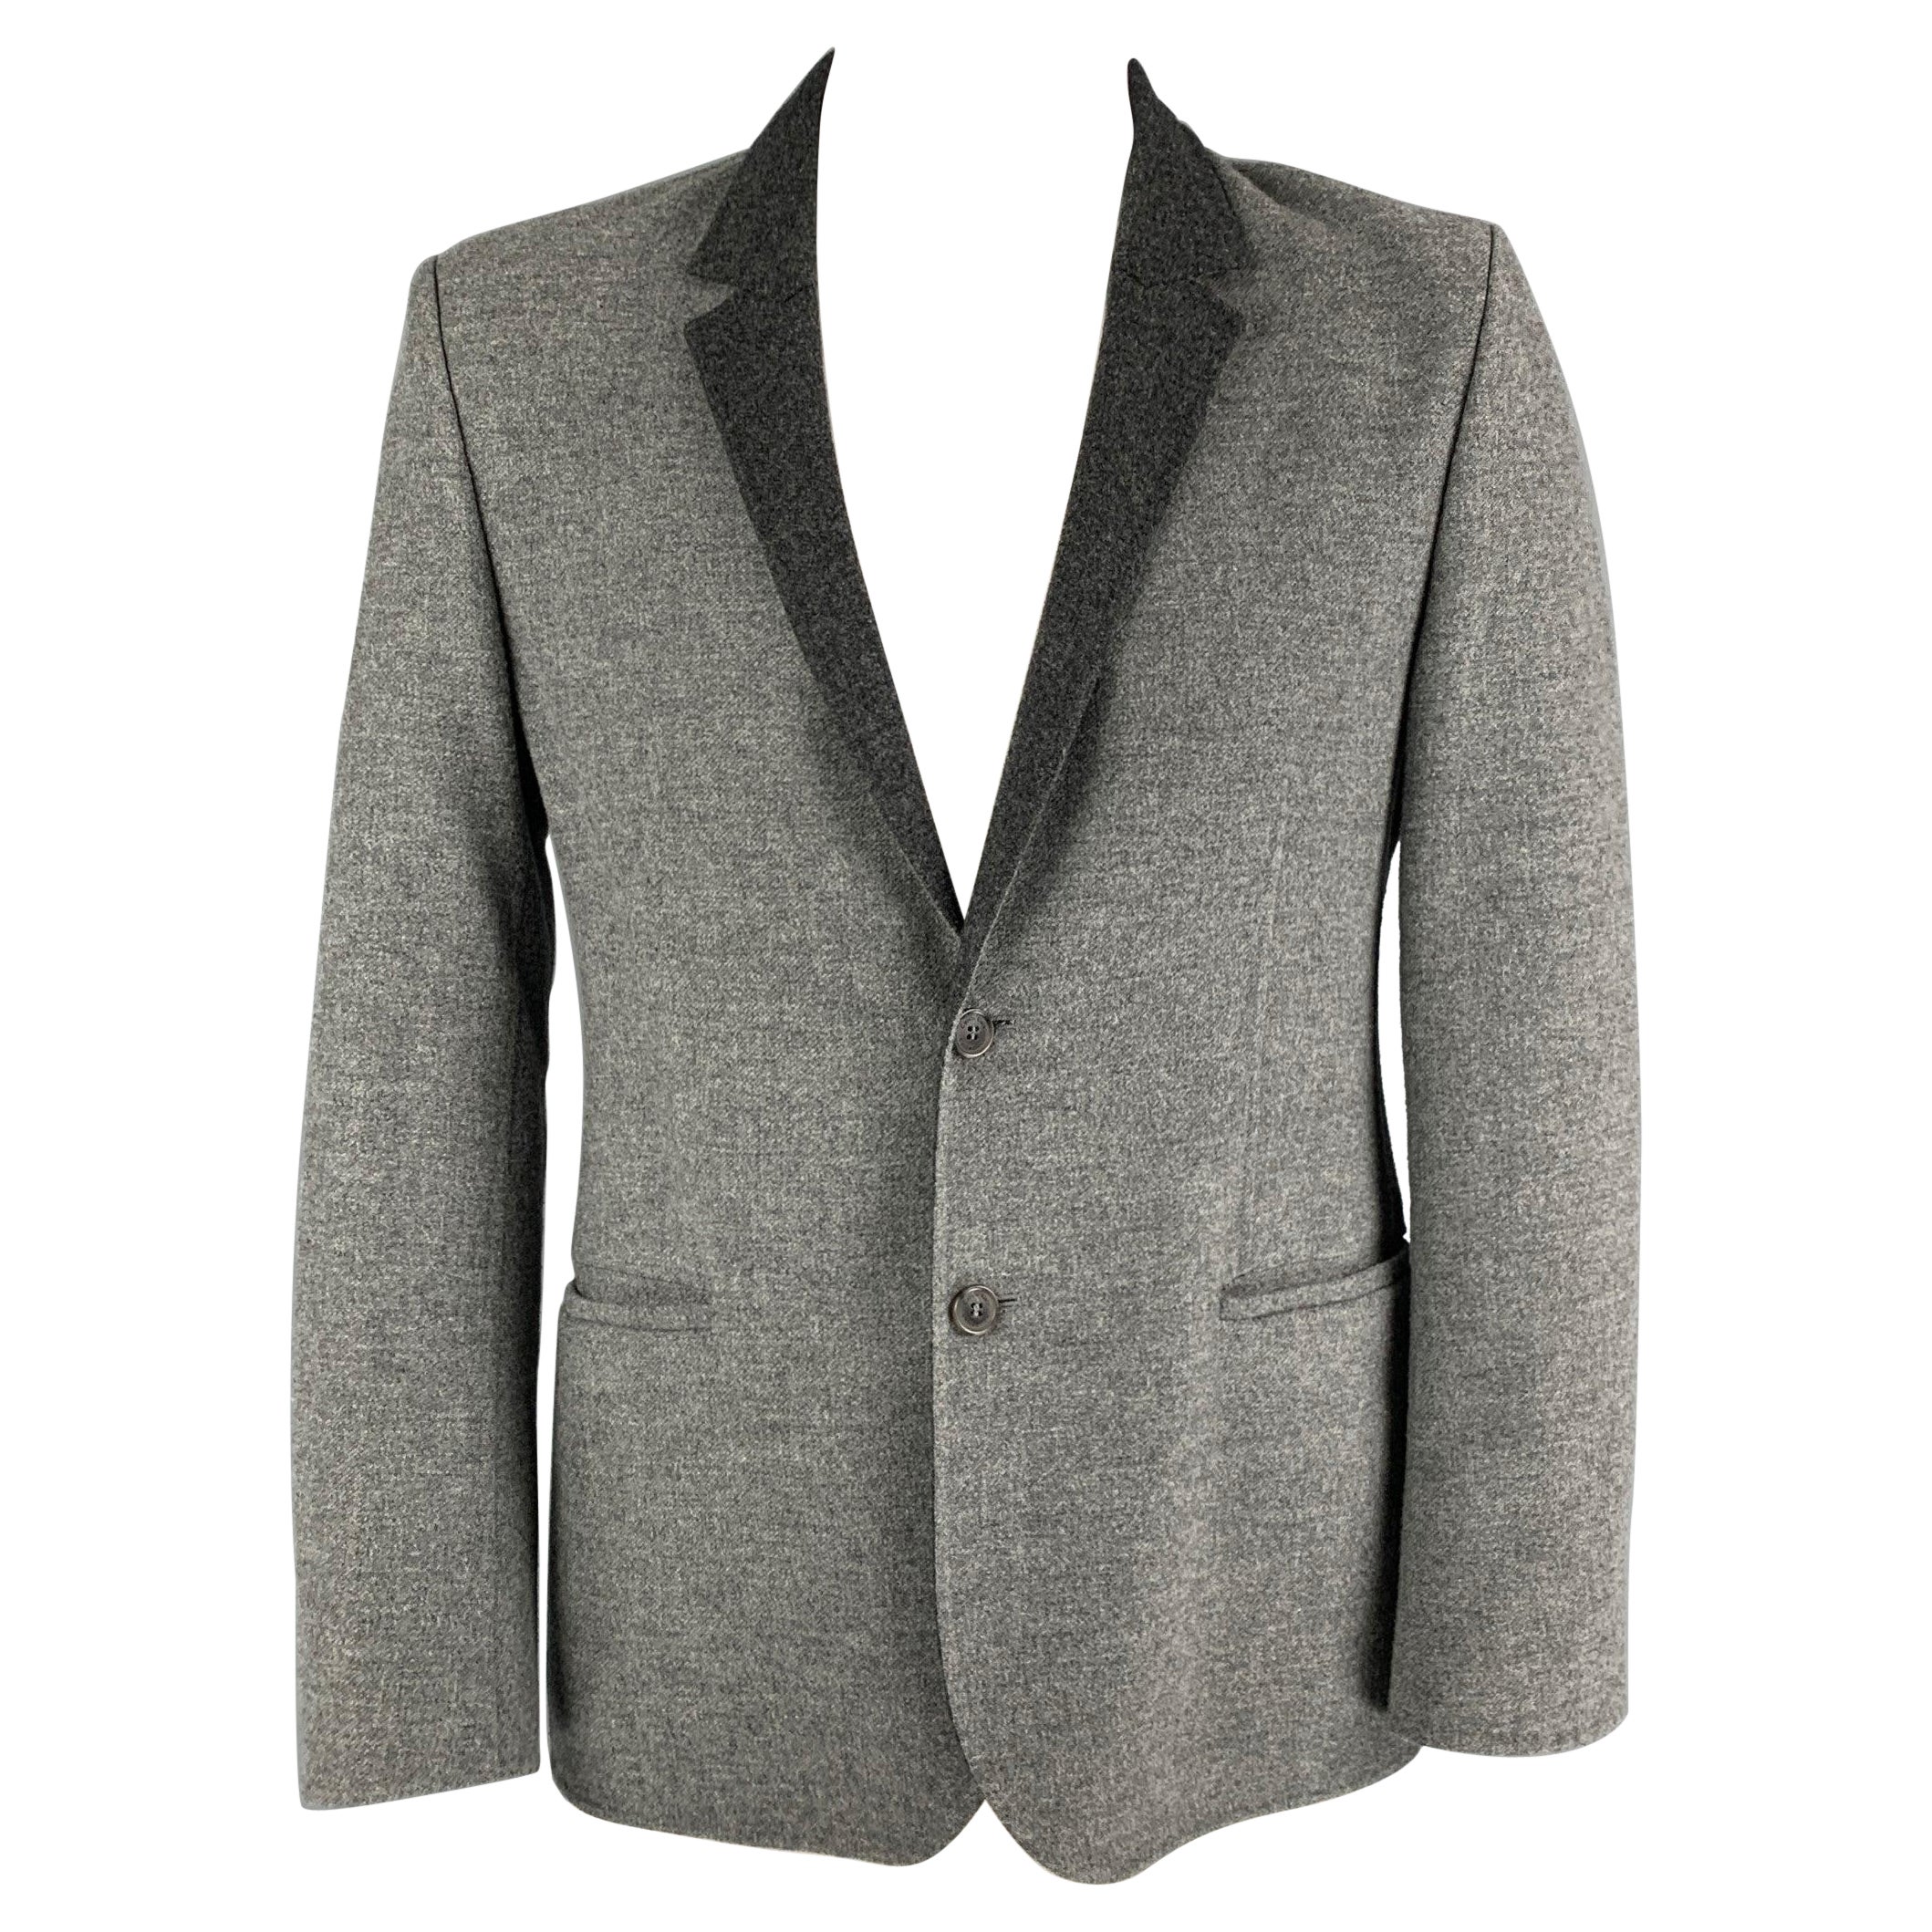 CALVIN KLEIN COLLECTION Size 42 Grey Charcoal Wool Sport Coat For Sale